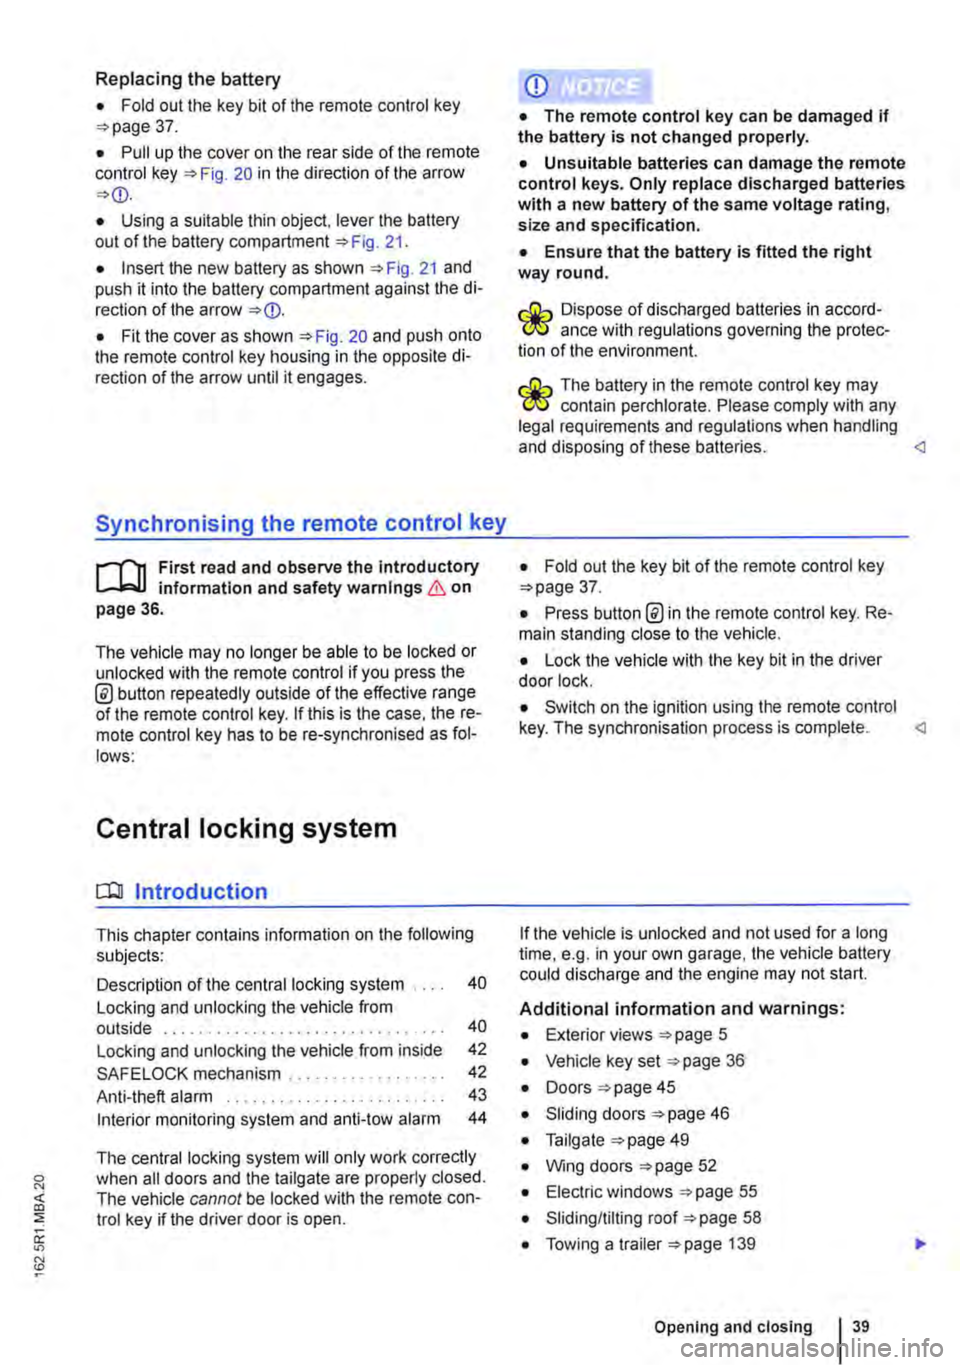 VOLKSWAGEN TRANSPORTER 2010  Owners Manual Replacing the battery 
• Fold out the key bit of the remote control key =>page 37. 
• Pull up the cover on the rear side of the remote control key =>Fig. 20 in the direction of the arrow =><D. 
�